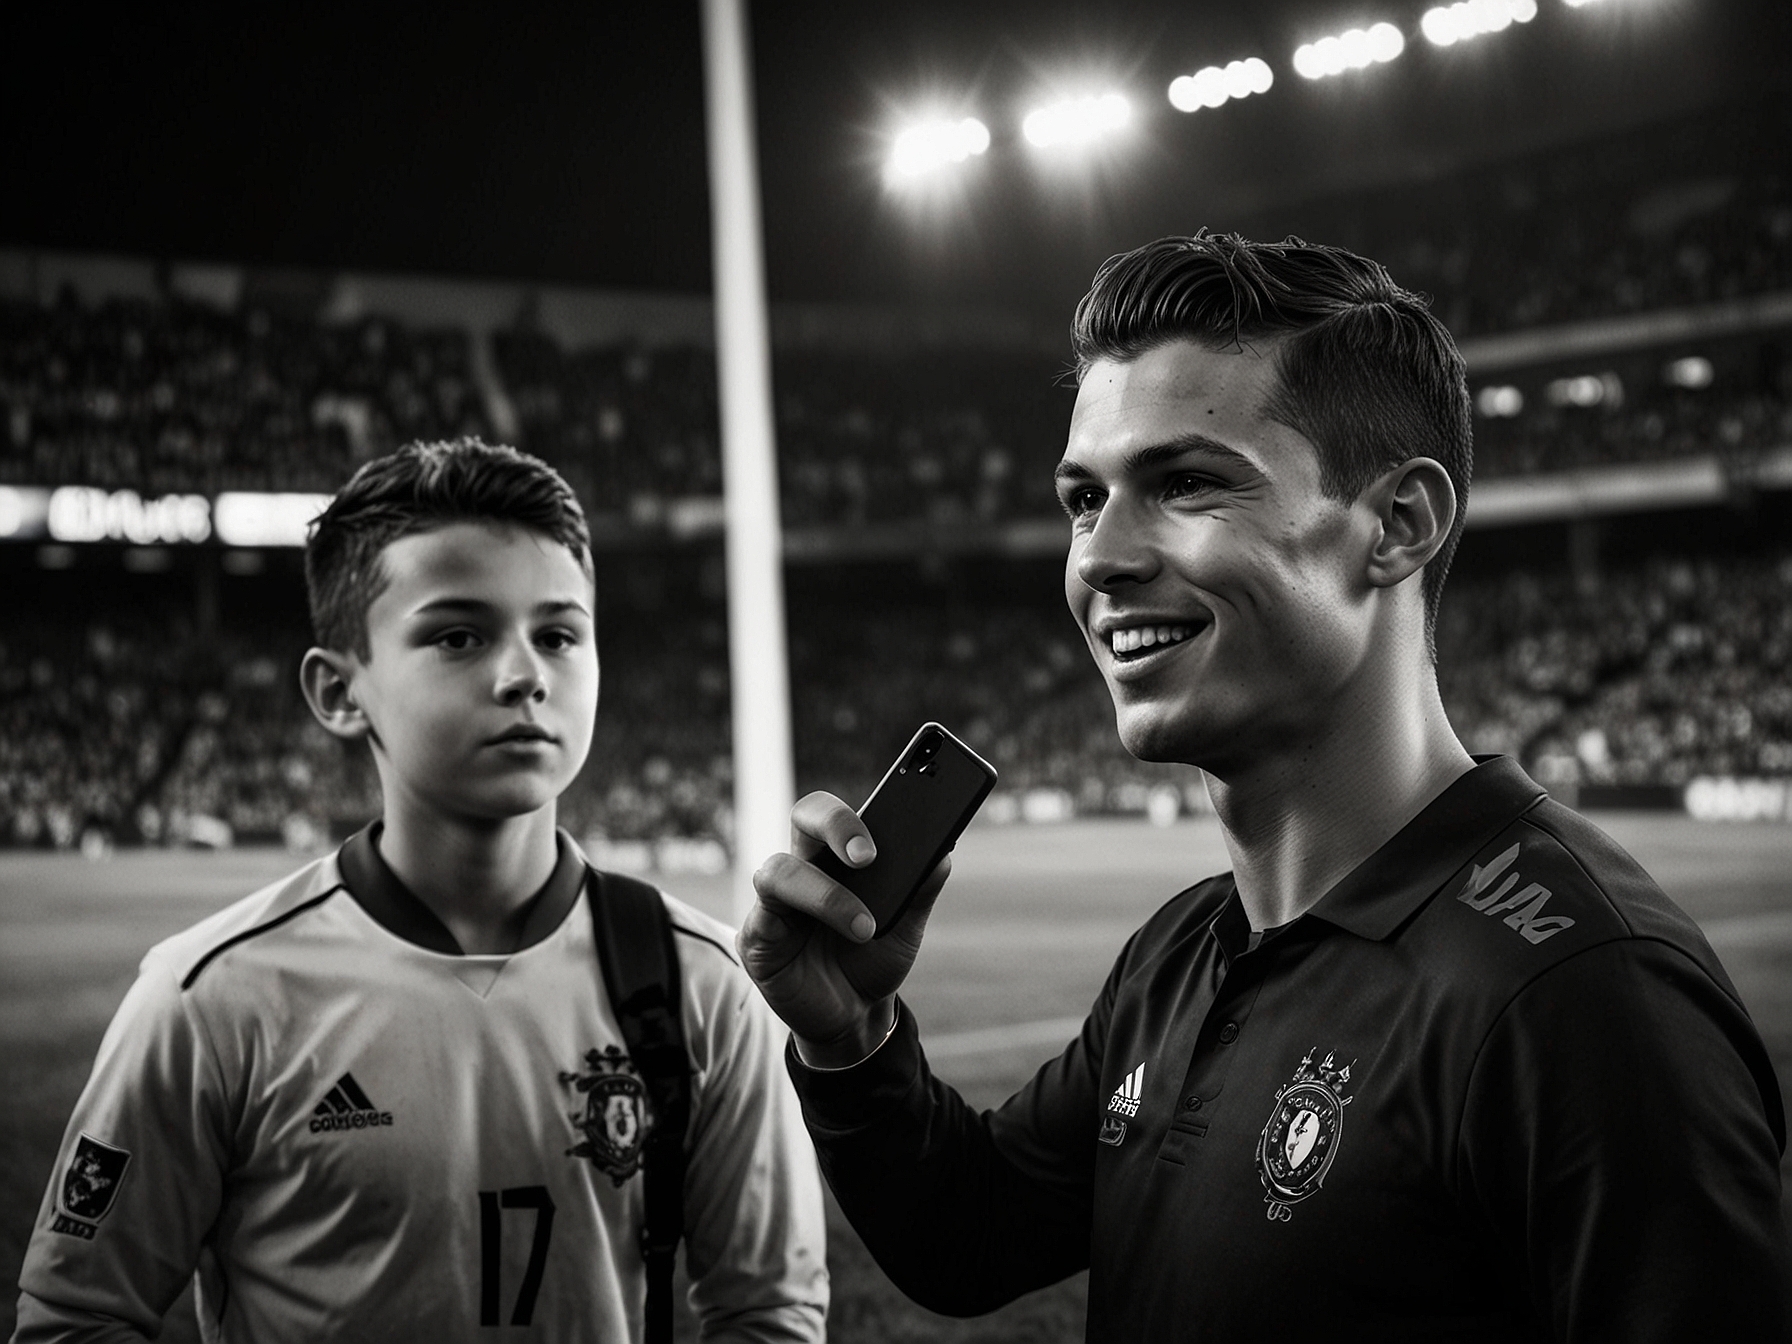 Cristiano Ronaldo takes a selfie with a young pitch invader during a Portugal match, capturing a touching moment that spread quickly on social media.